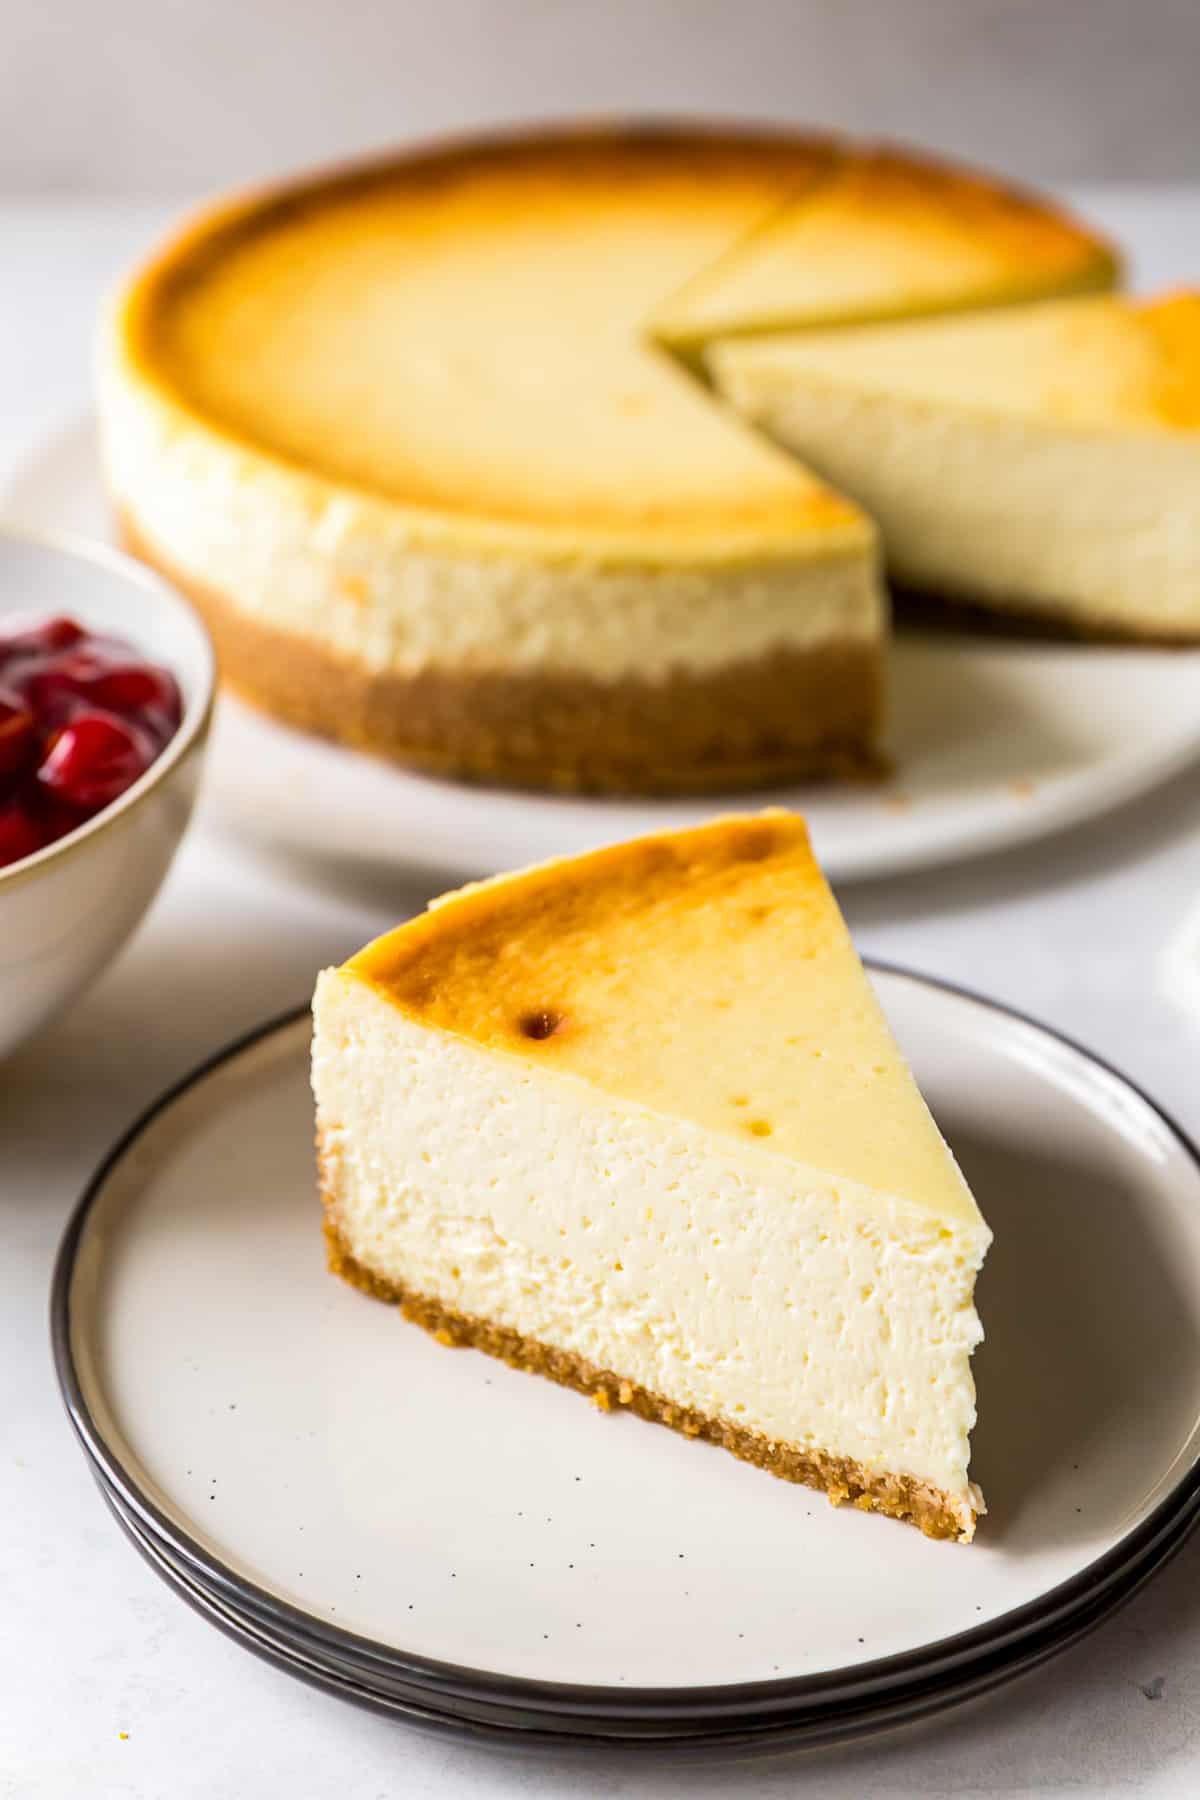 slice of new york style cheesecake with bowl of cherries